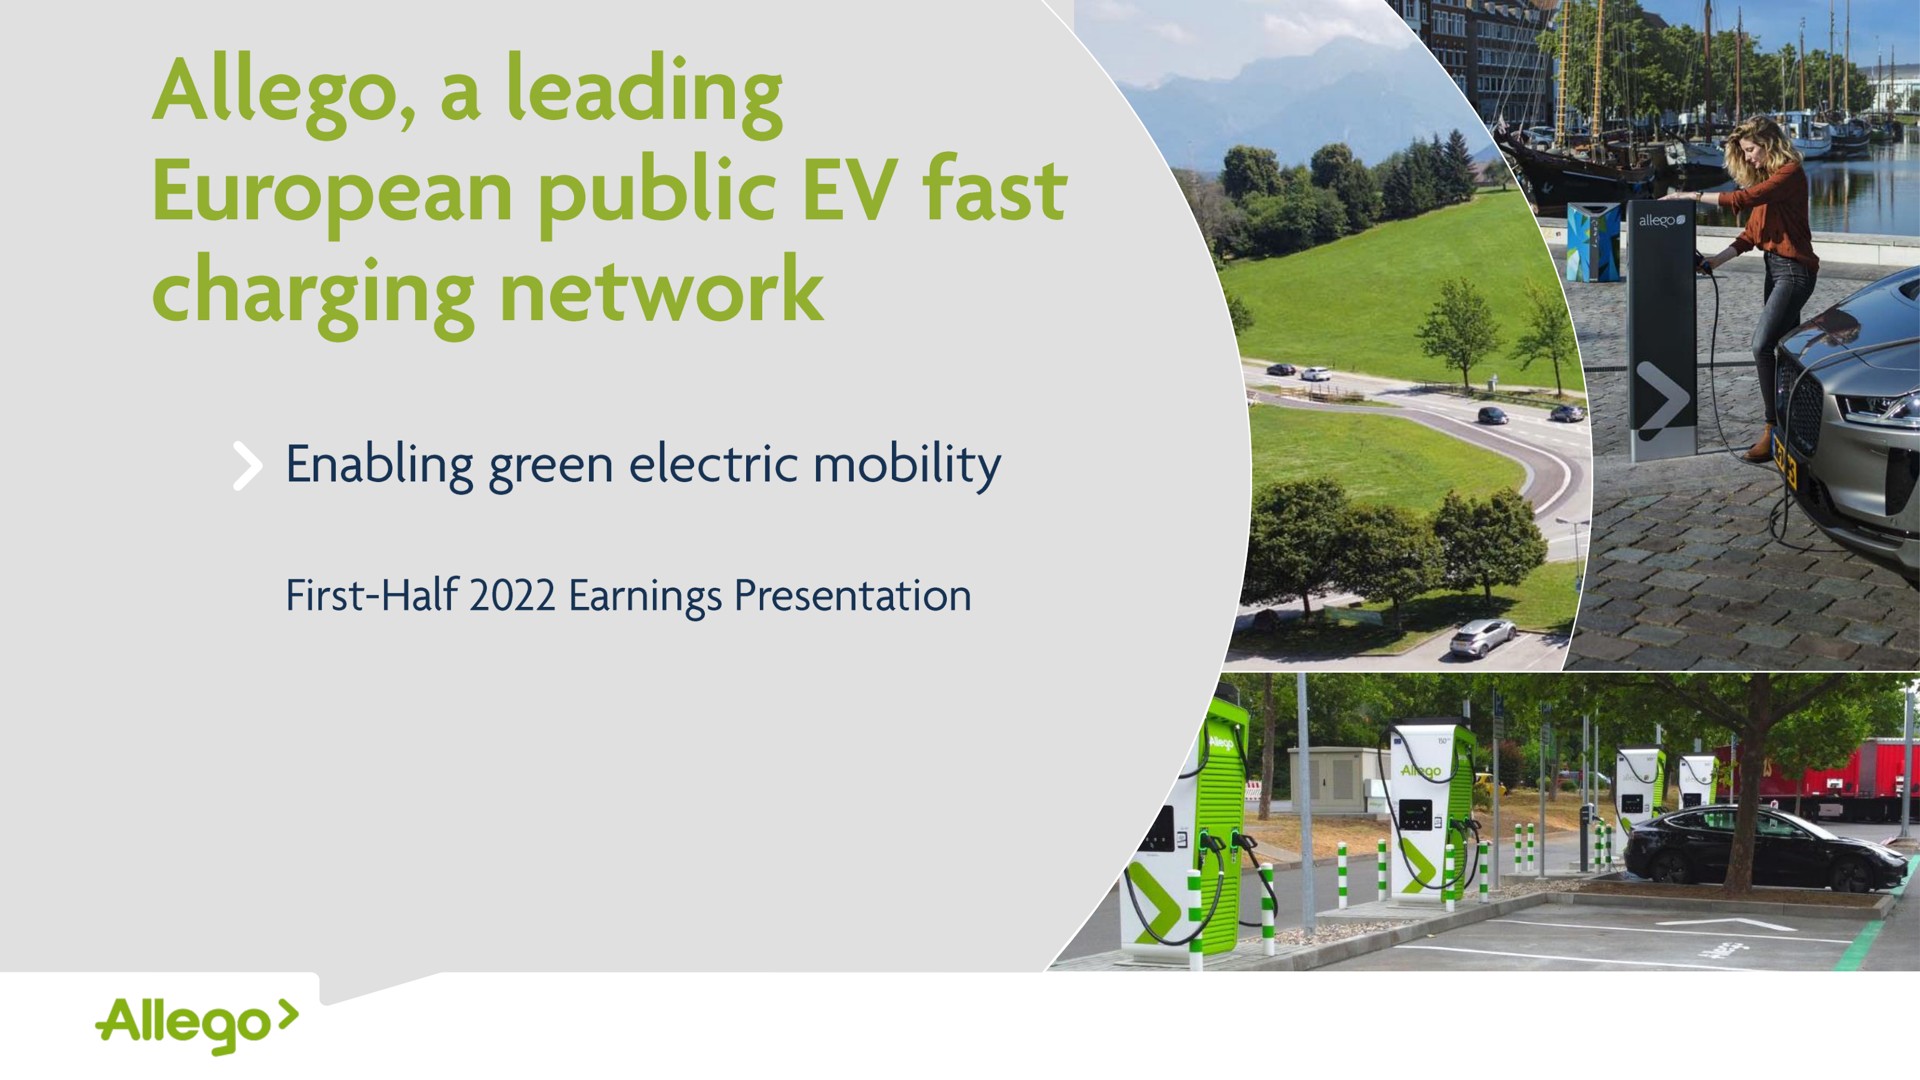 a leading public fast charging network enabling green electric mobility first half earnings presentation | Allego